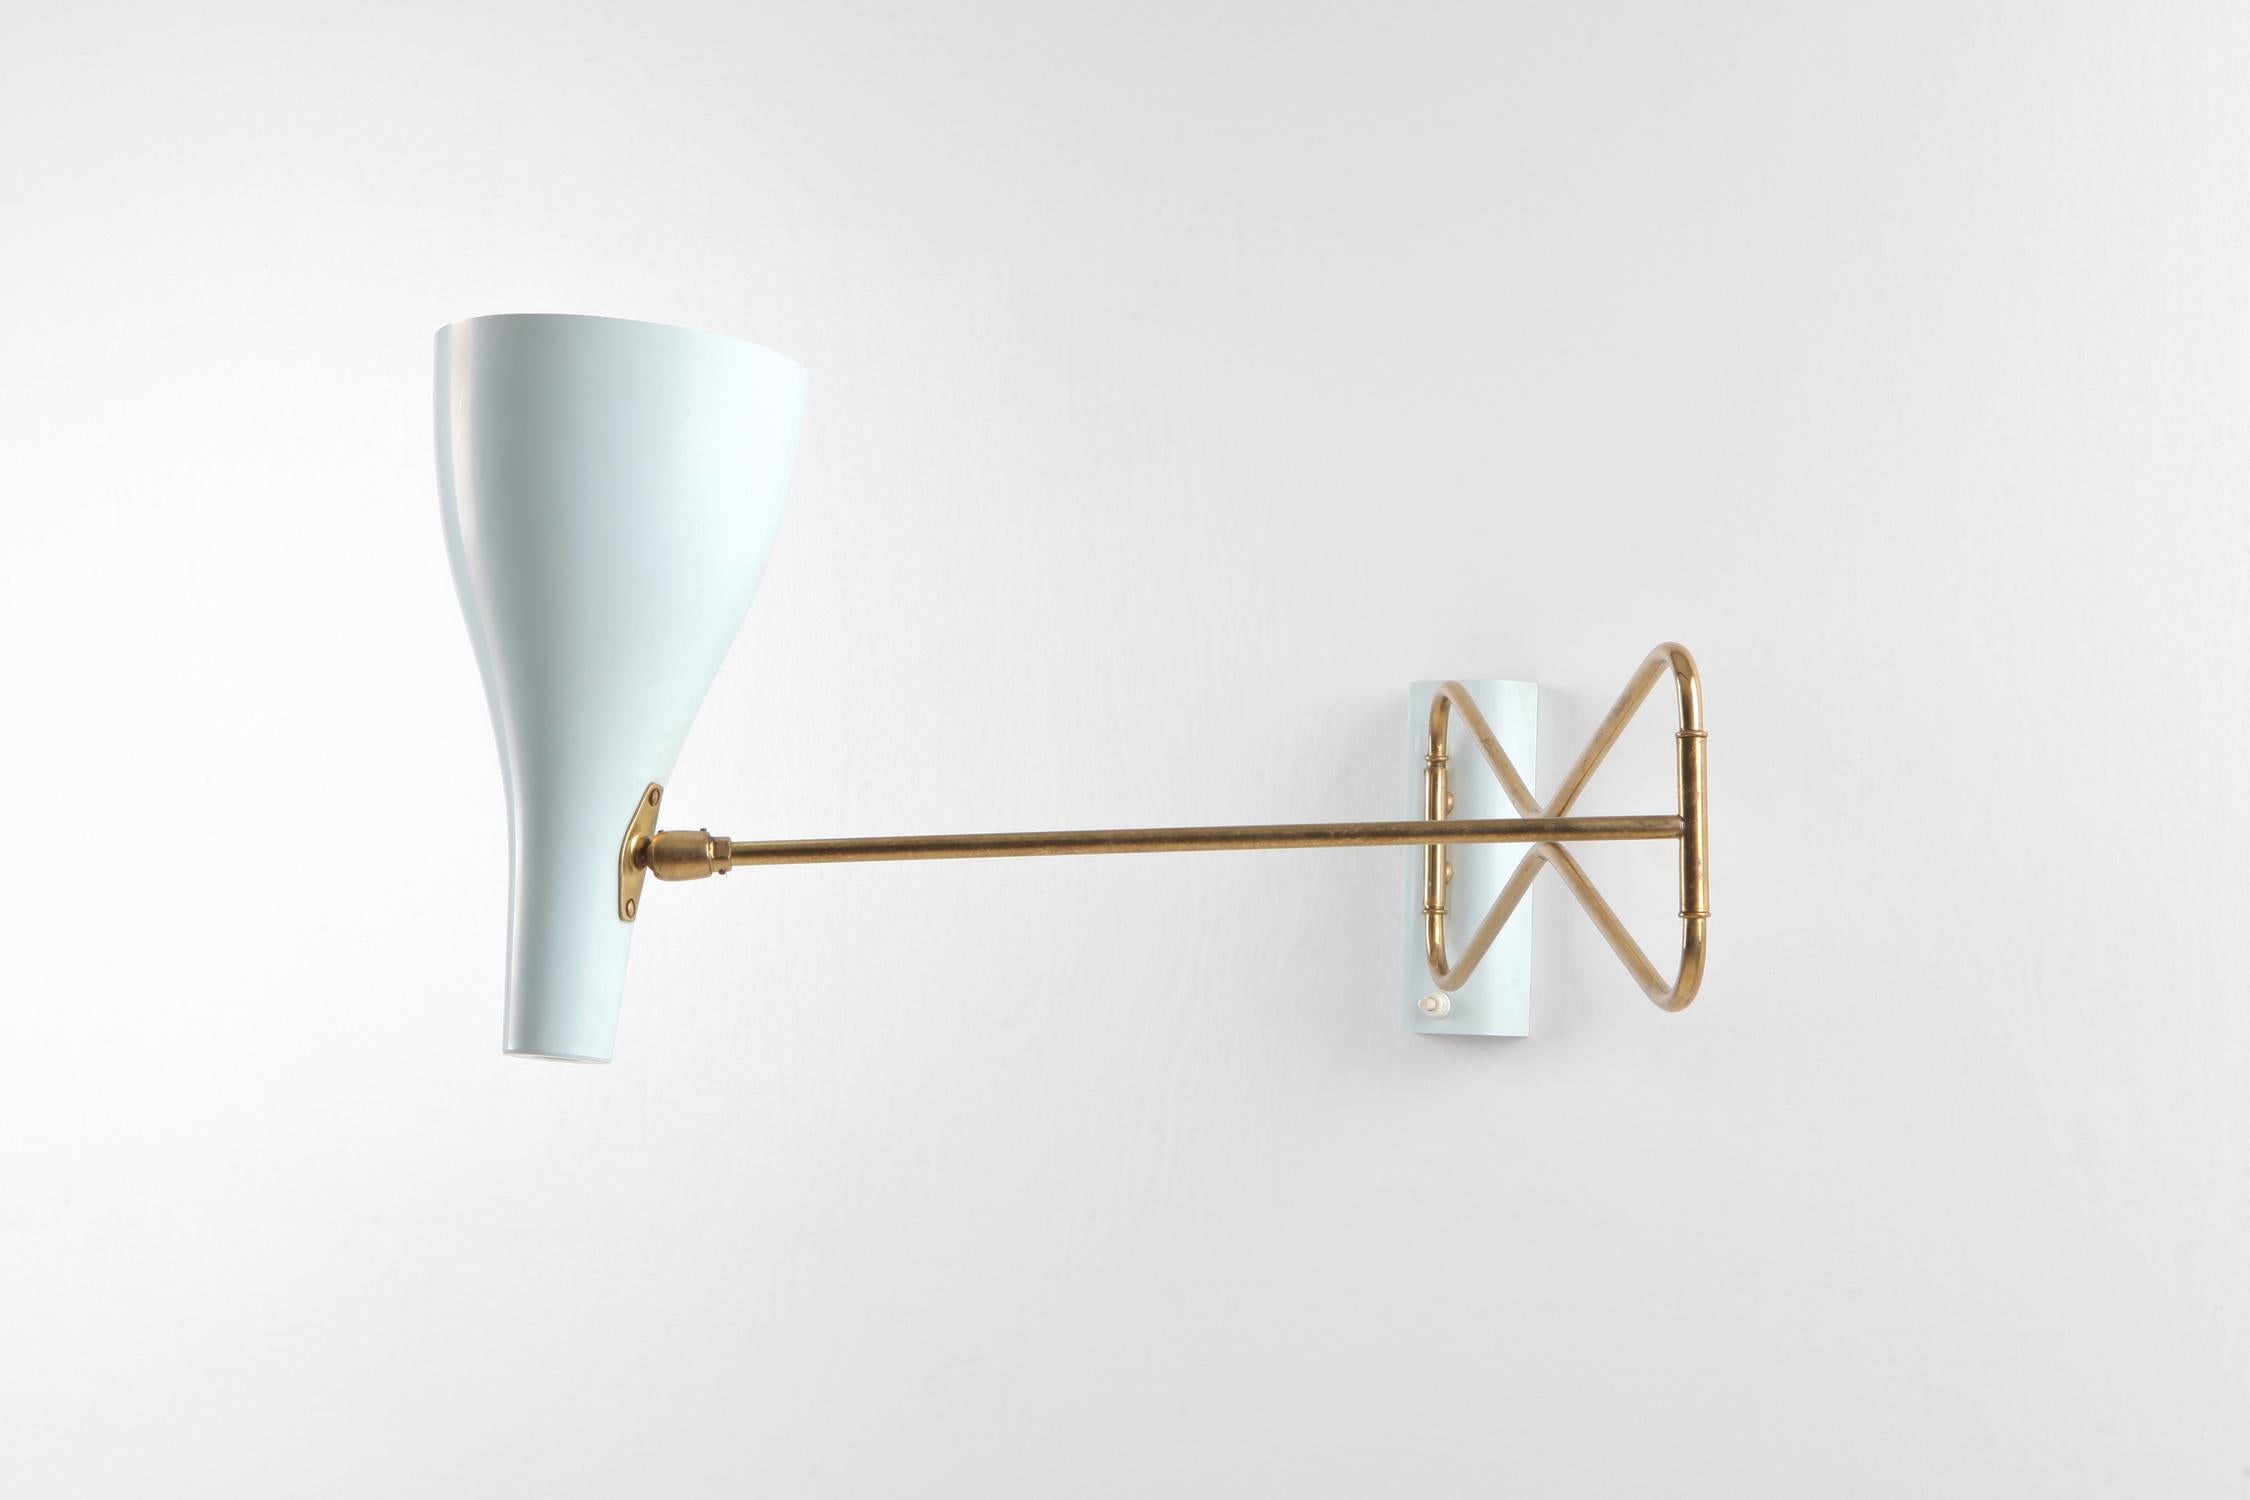 European Italian 1950s Wall Sconce in Baby Blue and Brass